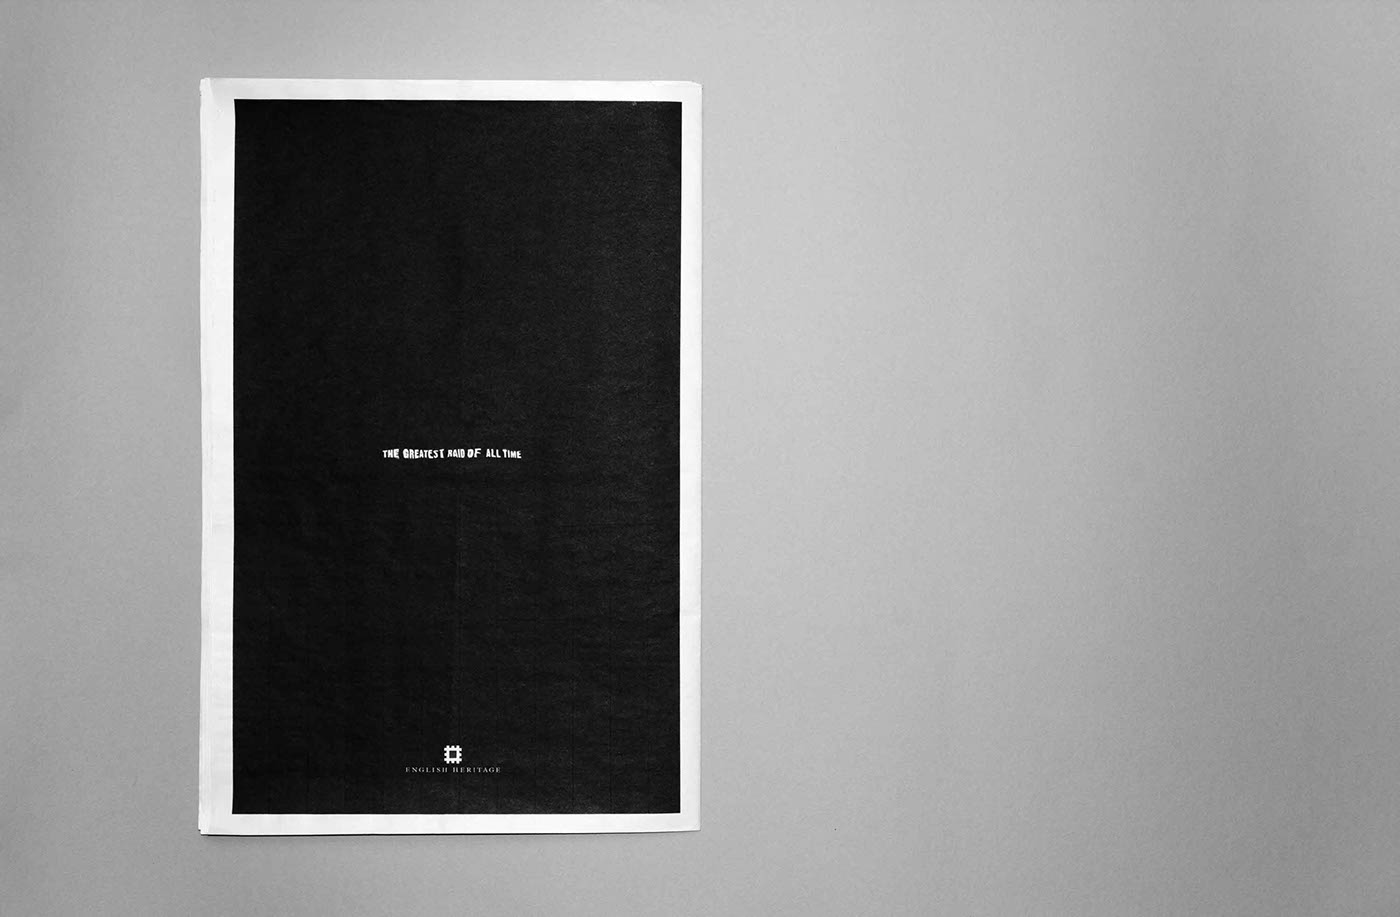 WW2 Raid Mission monochrome black white Greyscale Minimal Newspaper Poster Projection Type Font Logotype water distorted typography layout photos text identity branding logo Installation Film Exhibition Editorial print paper